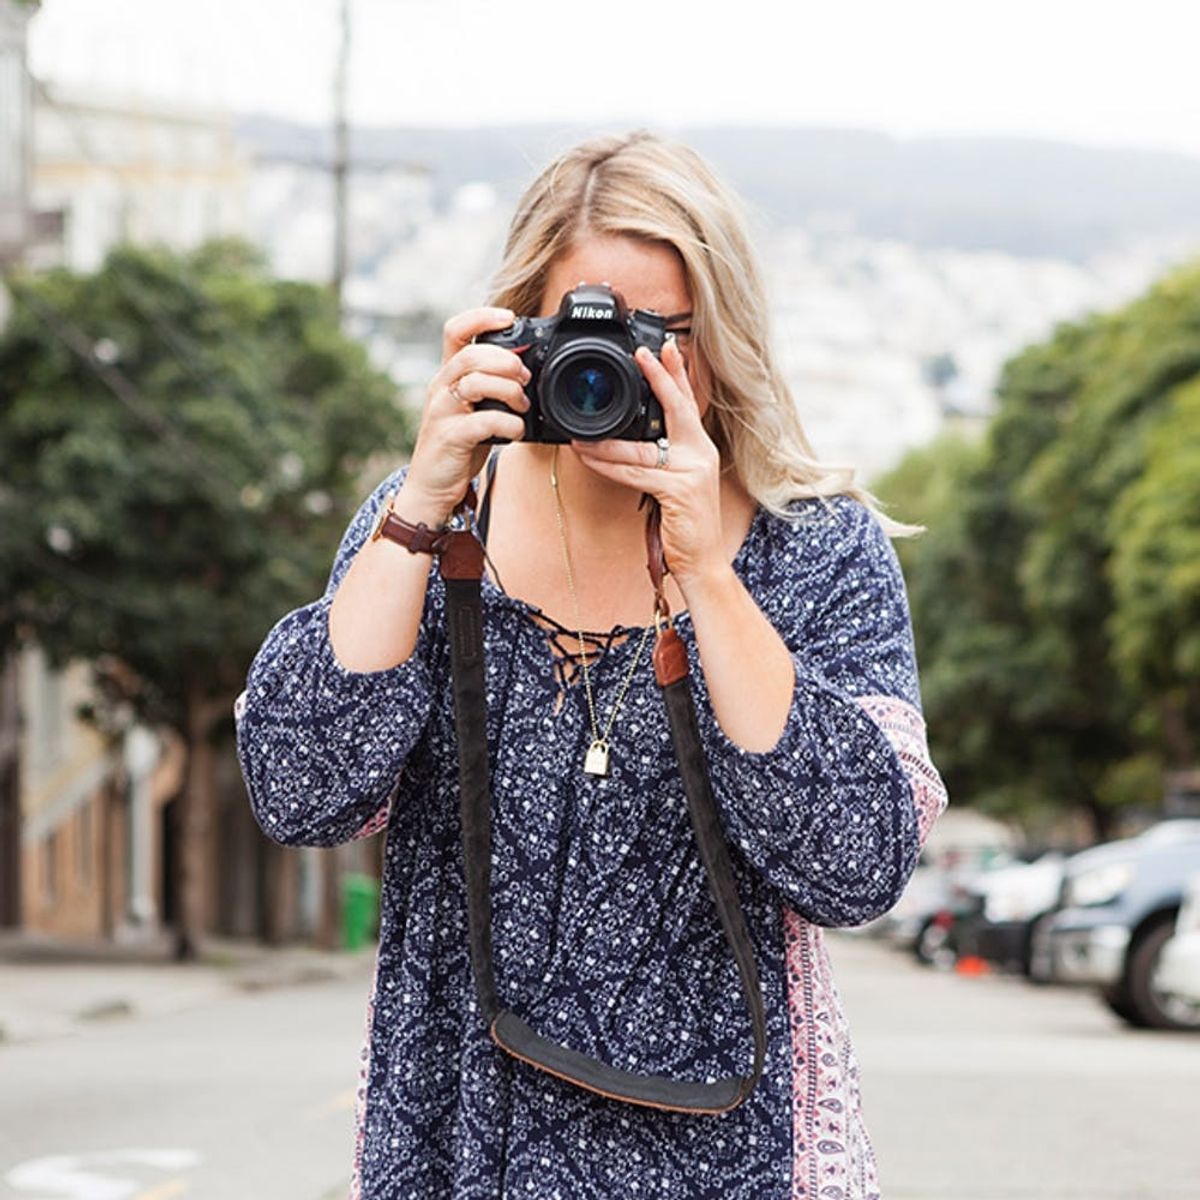 A Beginner Photography Class That Has All The DSLR Camera Pro Tips You’ll Need